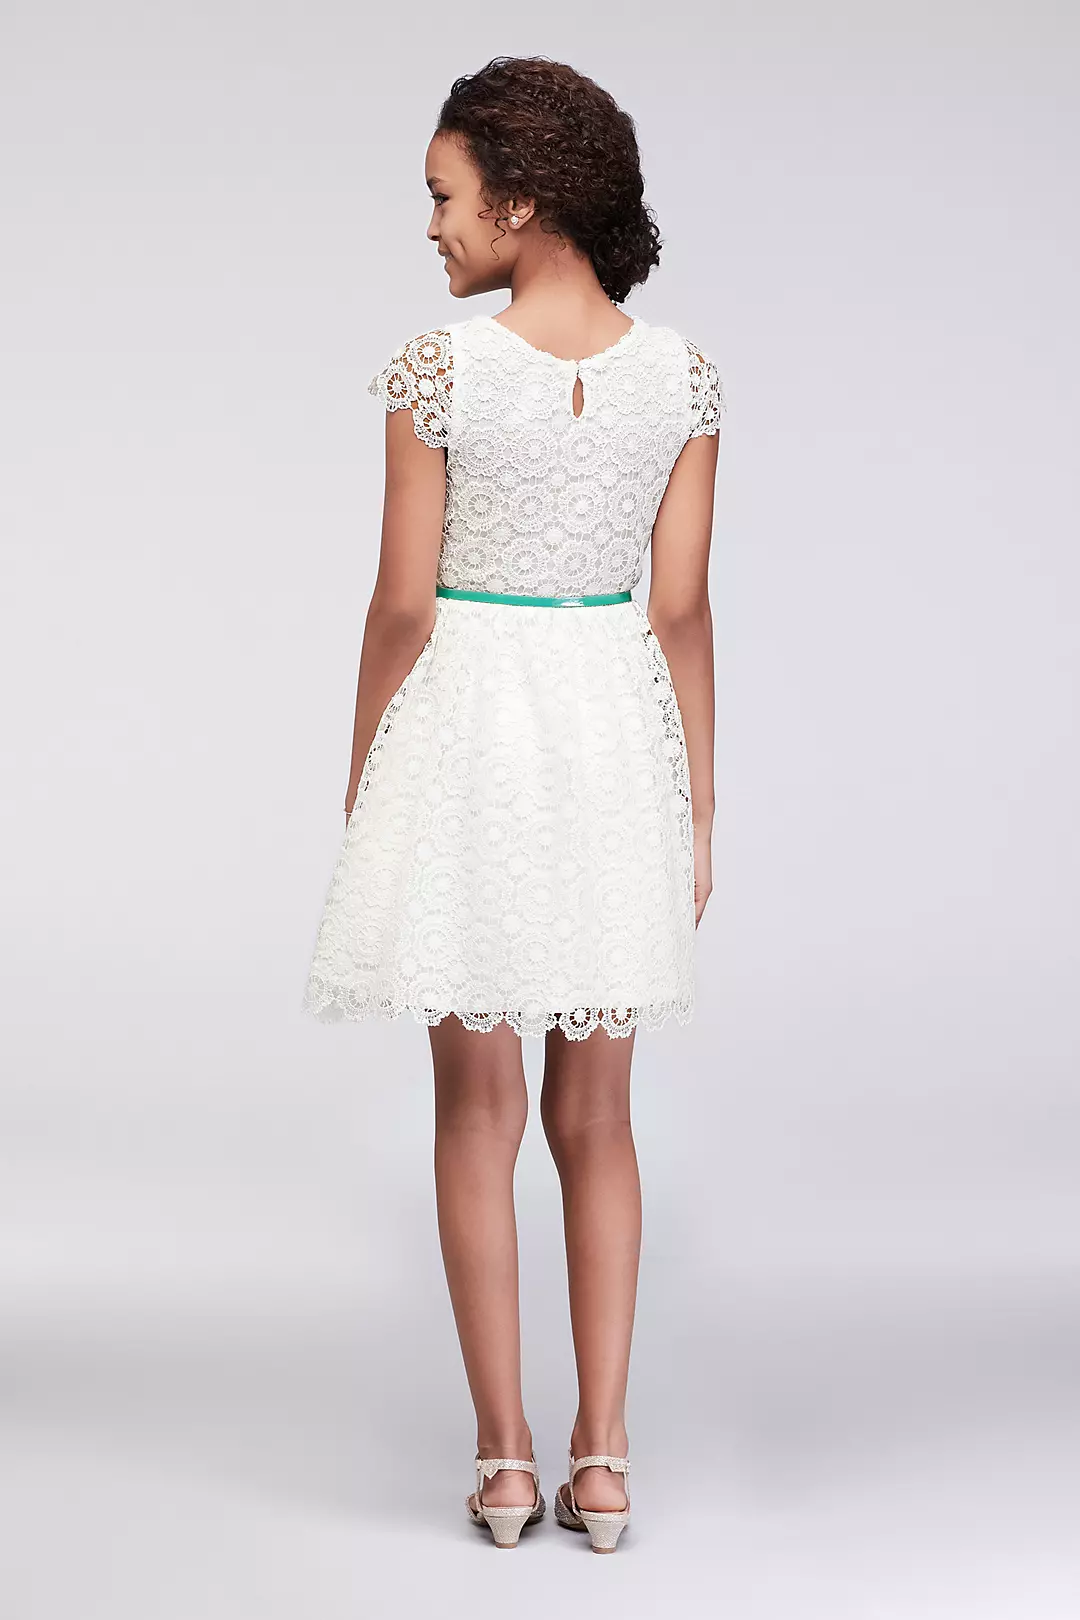 Cap Sleeve Lace Dress with Necklace and Belt Image 2